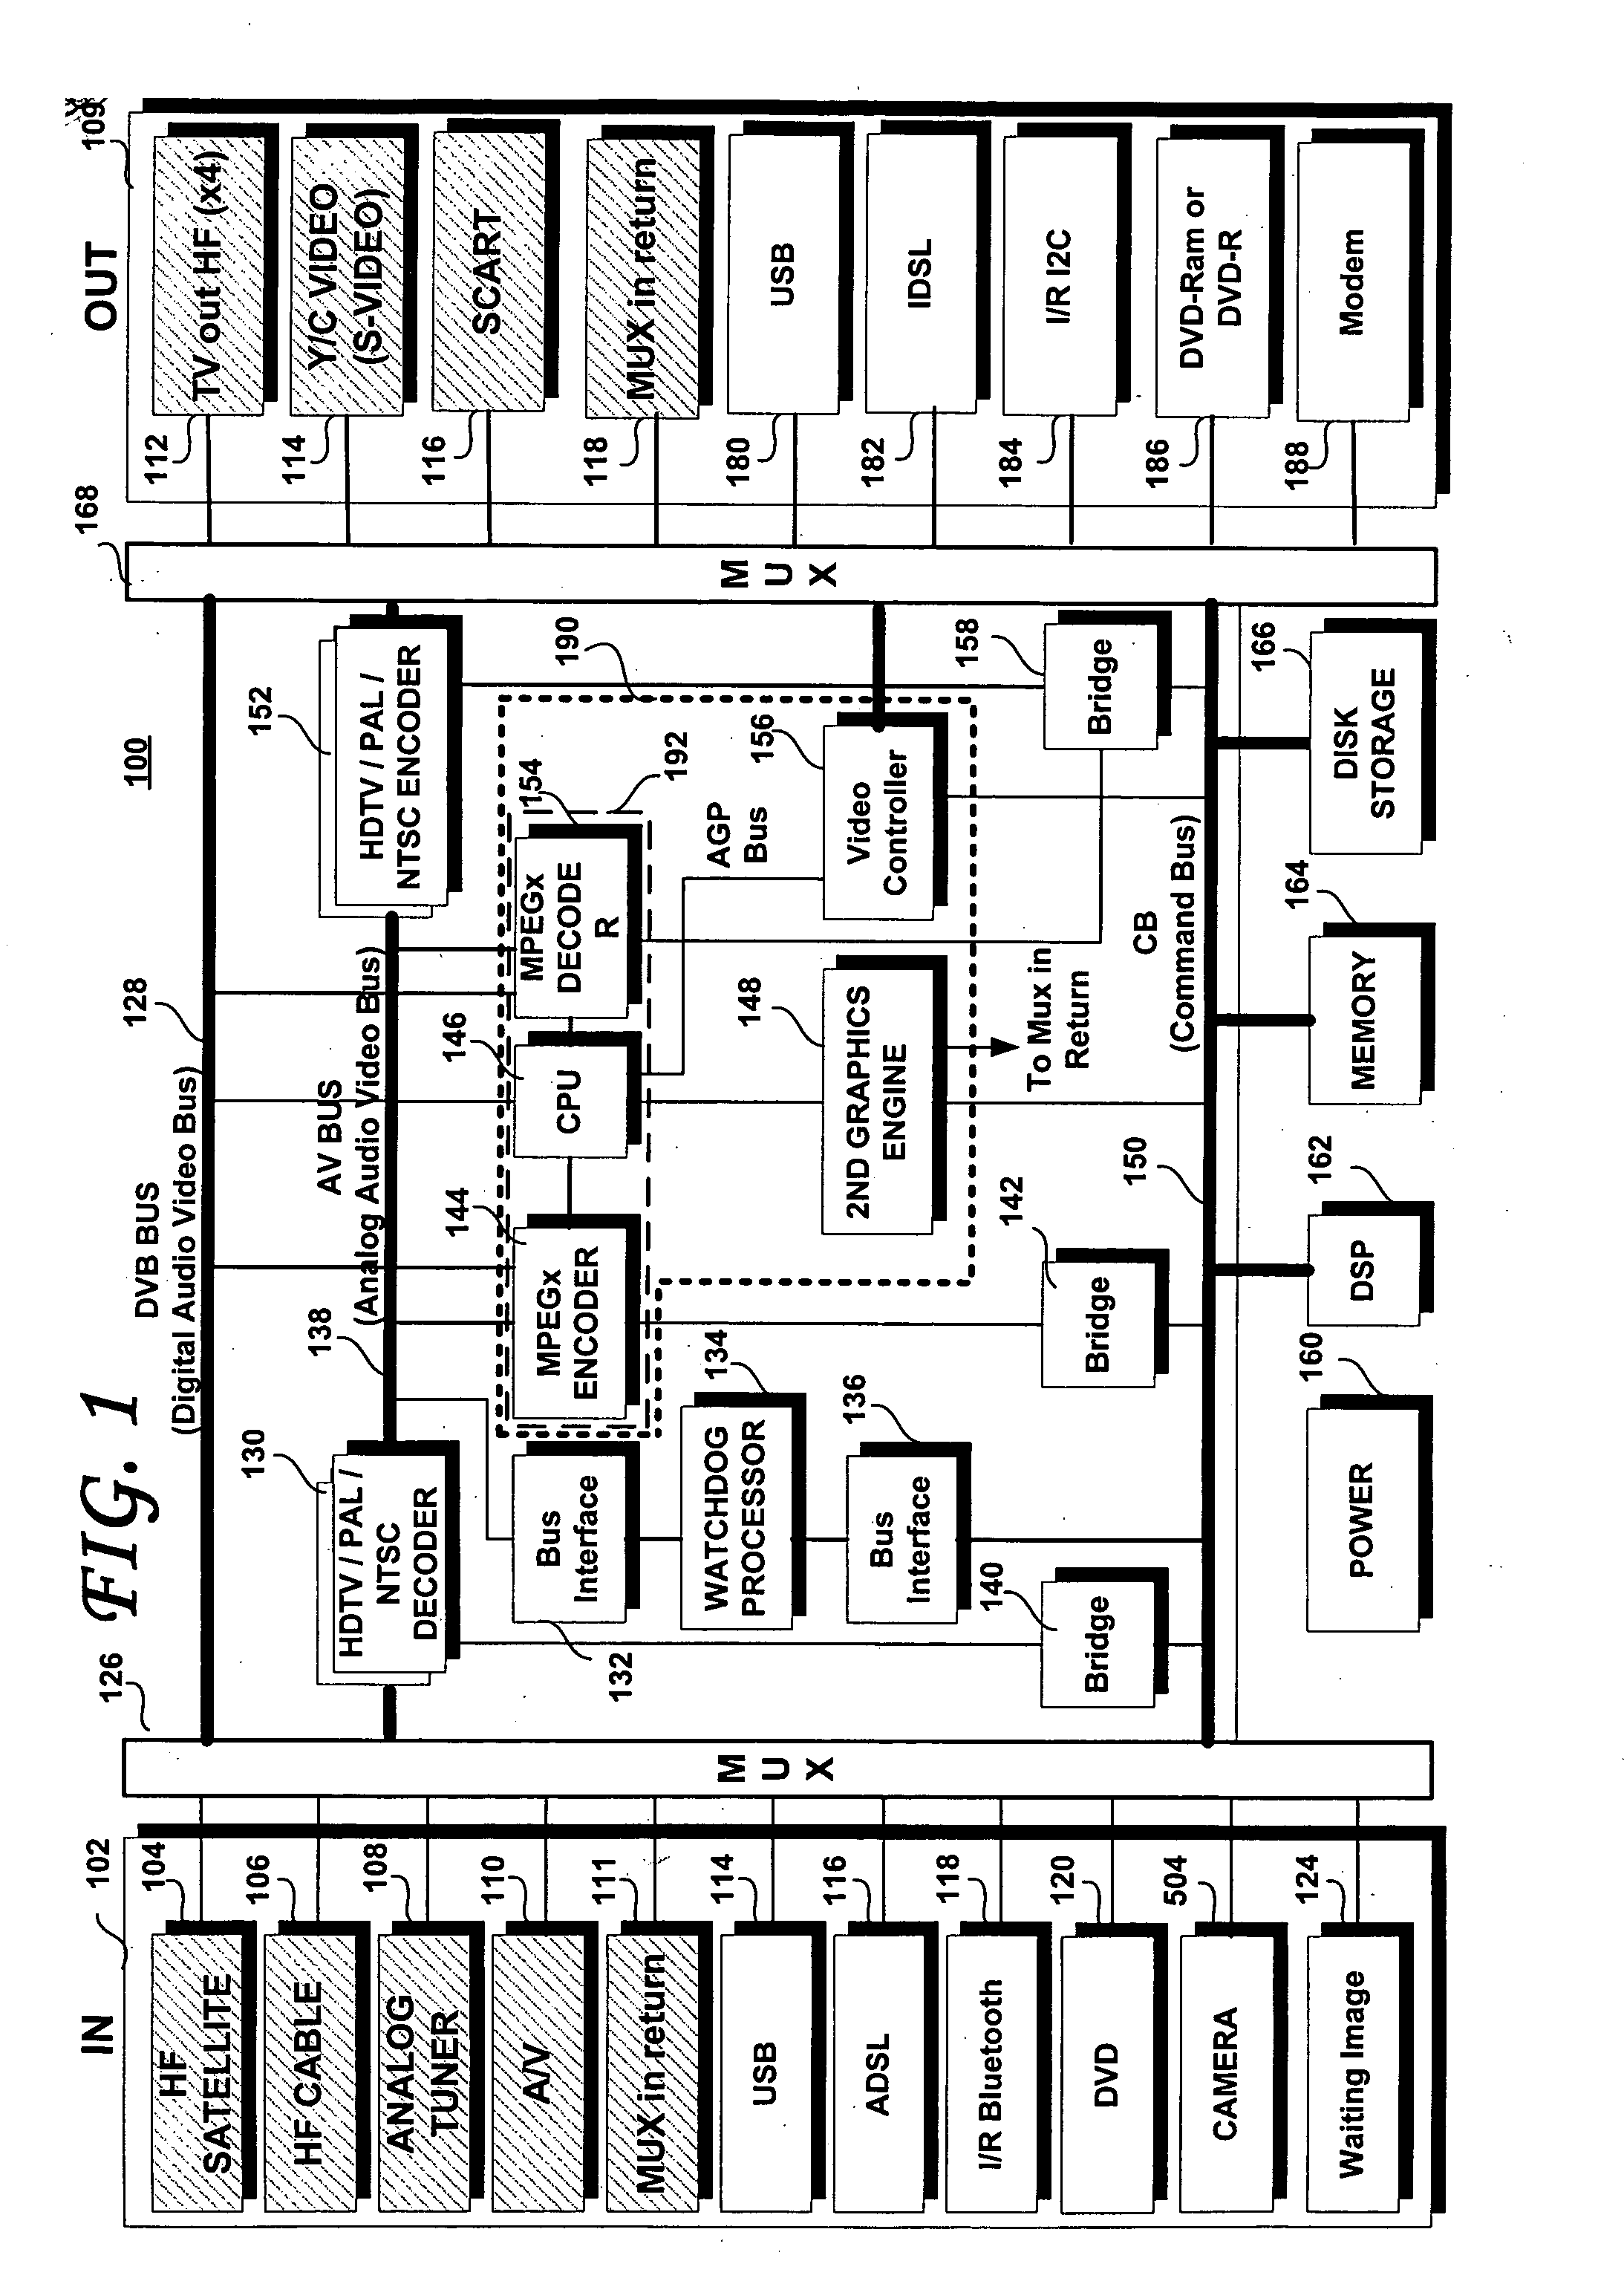 Methods and systems for interactive television